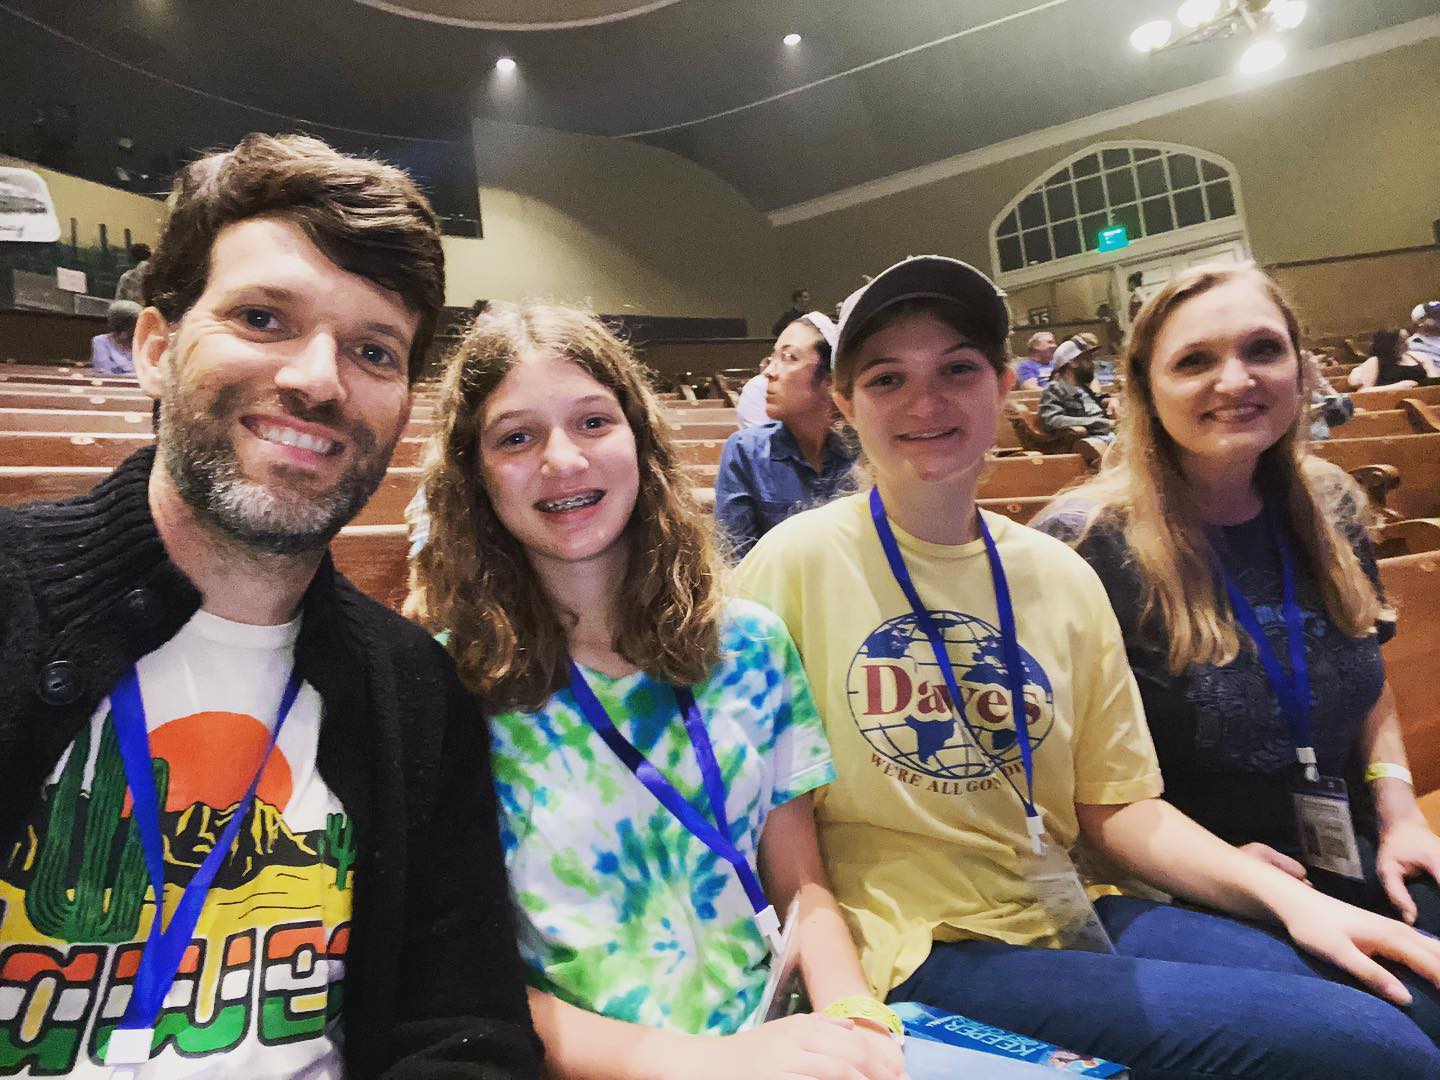 Back in my favorite room (@theryman) to see one of the best bands on the planet (@dawestheband) for the 9th time (me), 6th time (Olivia), and 5th time (Kate & Sara).